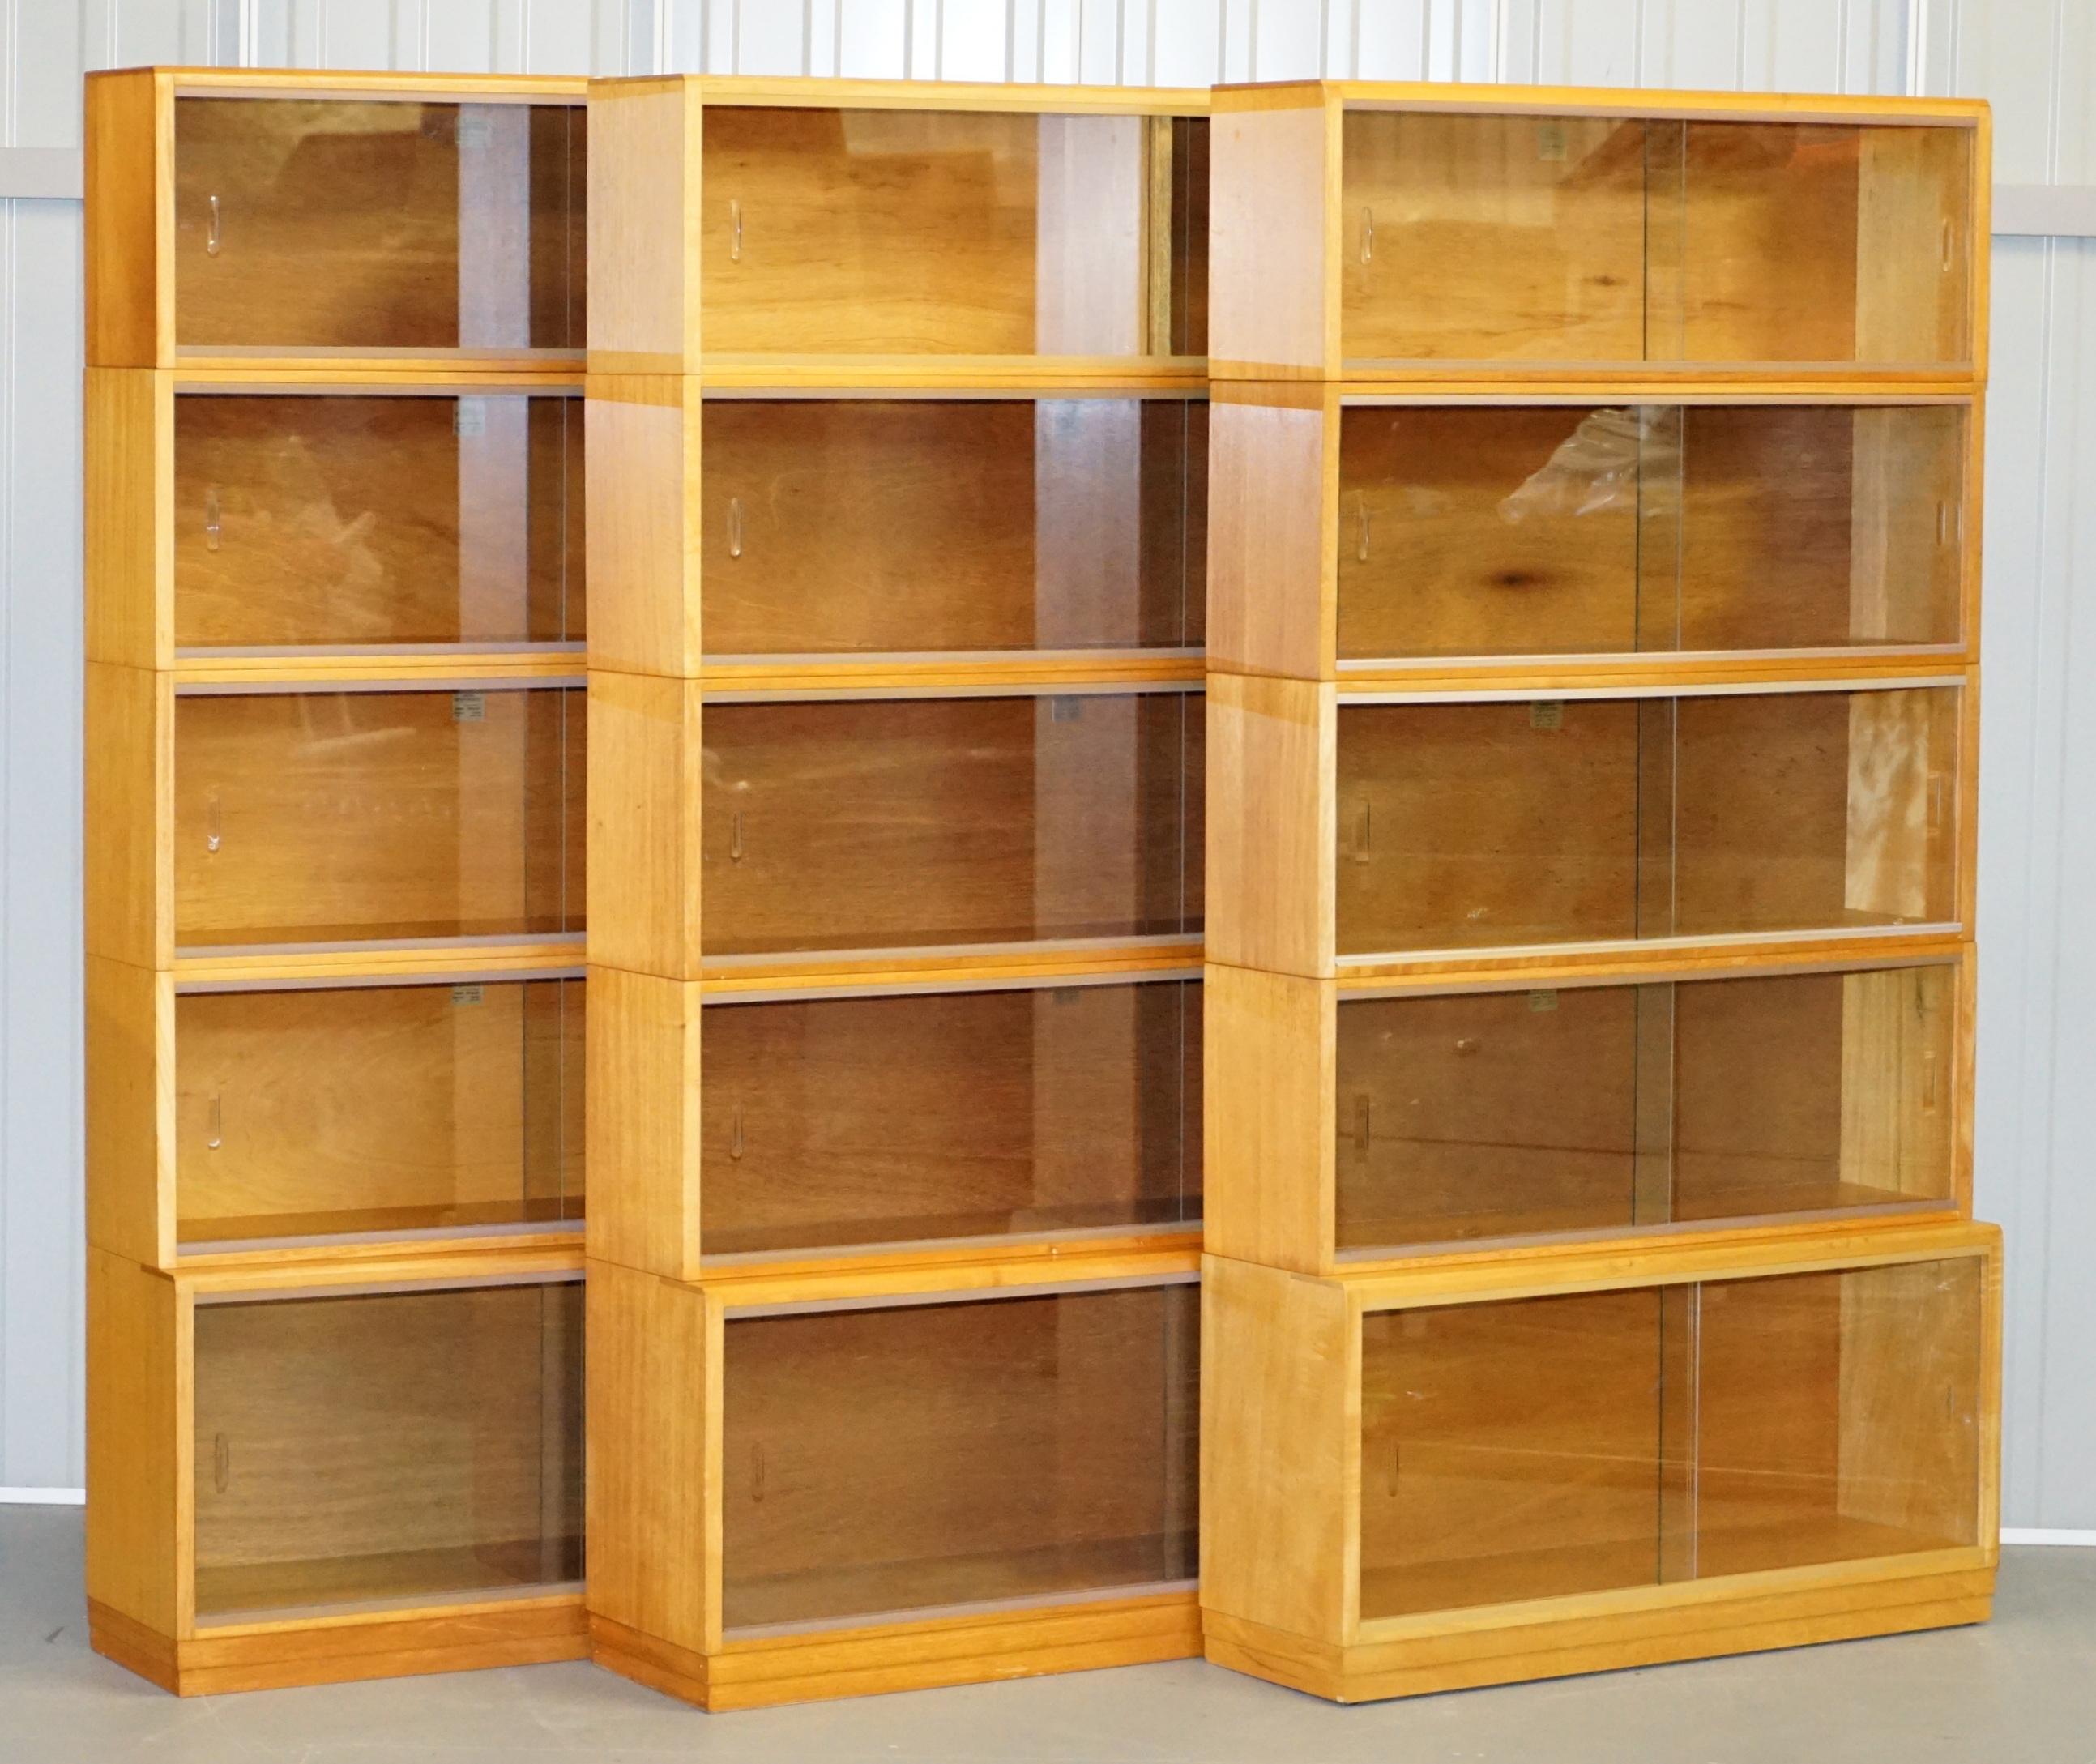 We are delighted to offer for sale this stunning suite of three simplex golden light oak Library Legal bookcases with glass sliding doors

A very good looking well made and highly collectable set of library bookcase. The total width is 305cm so